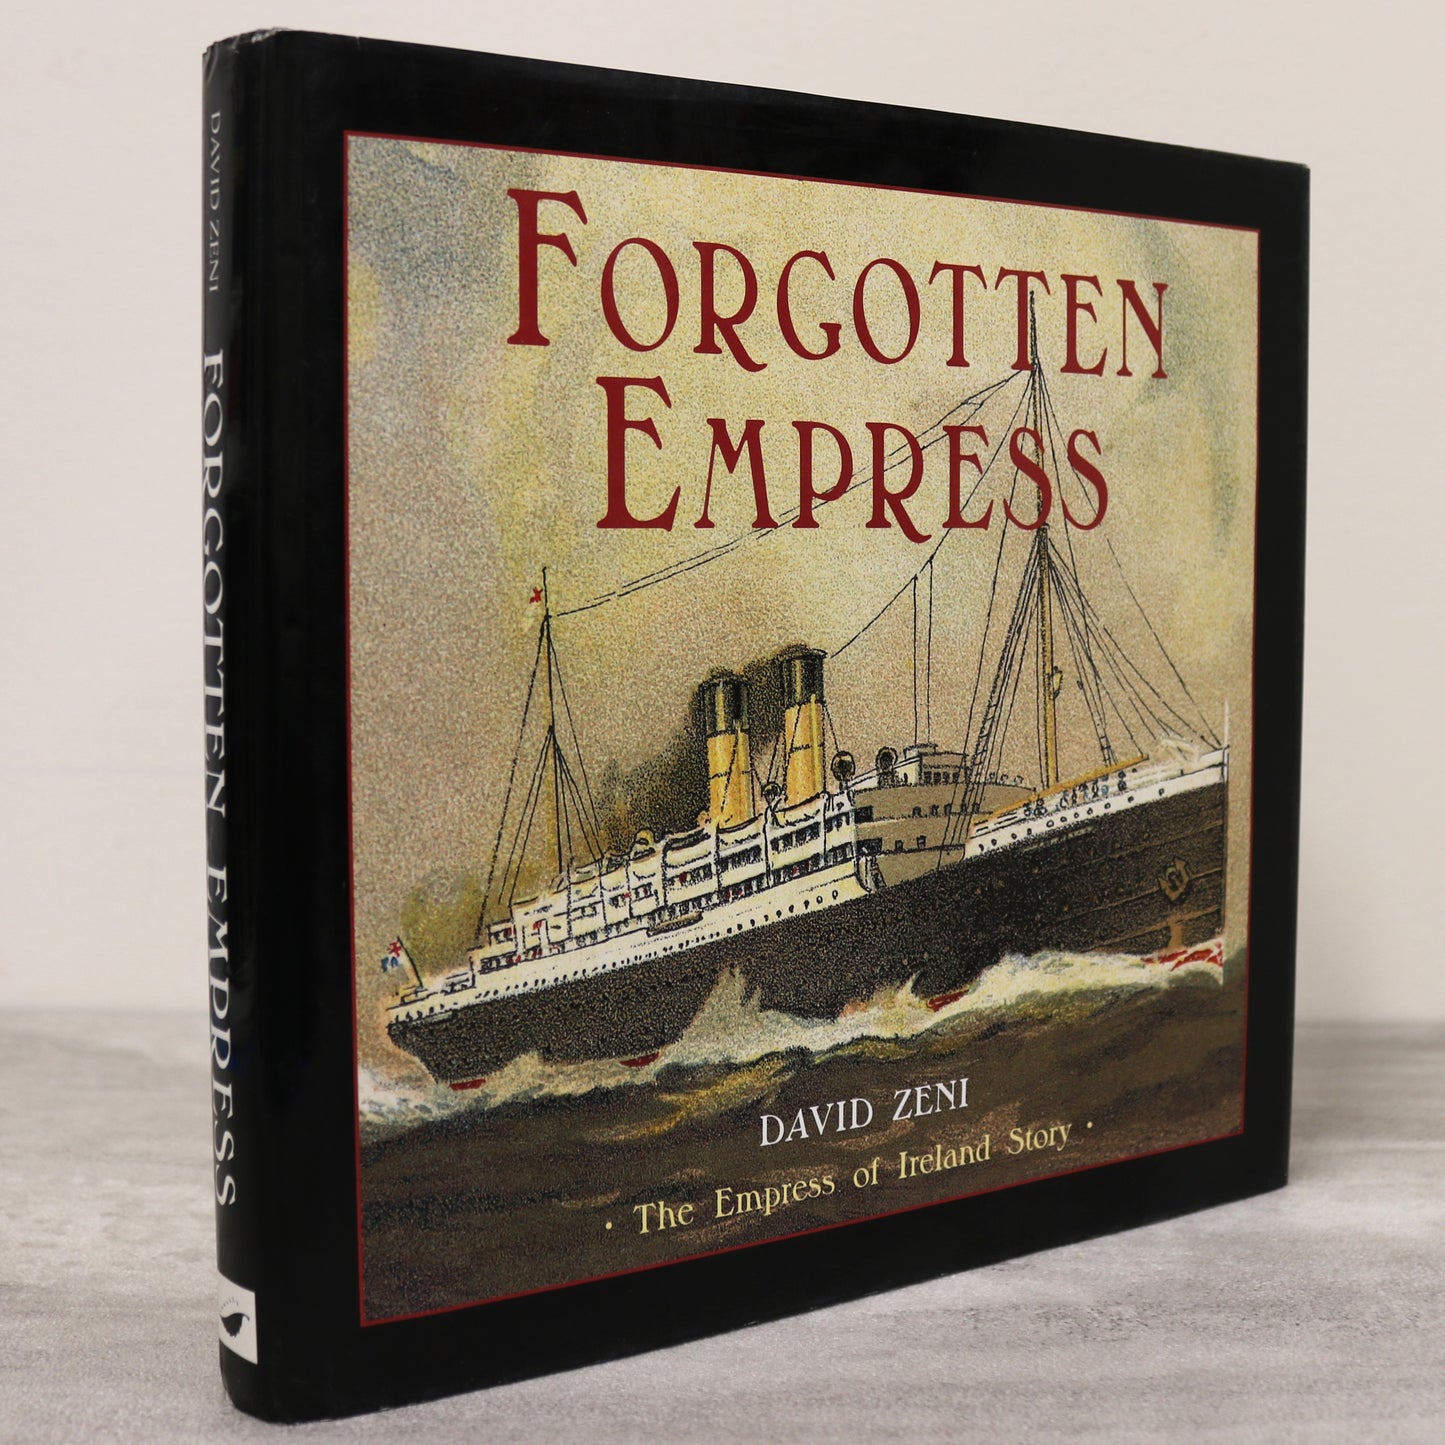 Forgotten RMS Empress of Ireland Steamship Steamboat Liner History Used Book